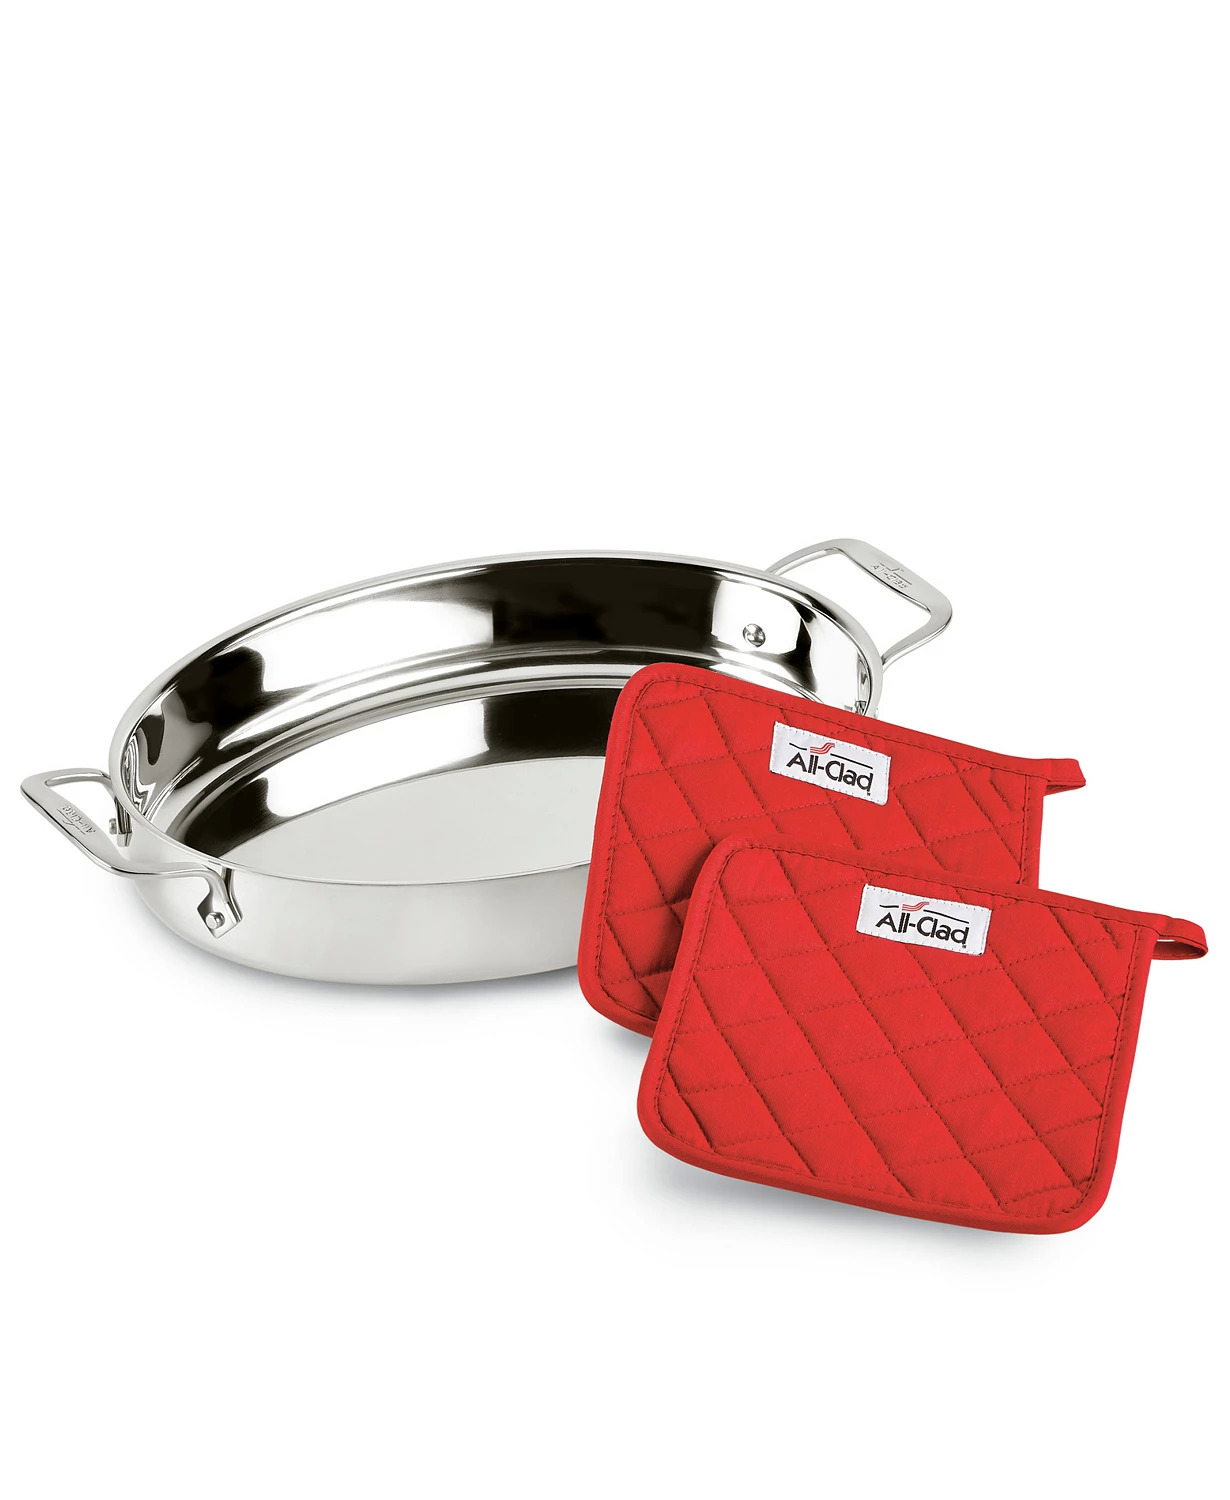 All-Clad Stainless Steel 15" Oval Baker & 2 Pot Holders Set $35 + SD Cashback + Free Shipping